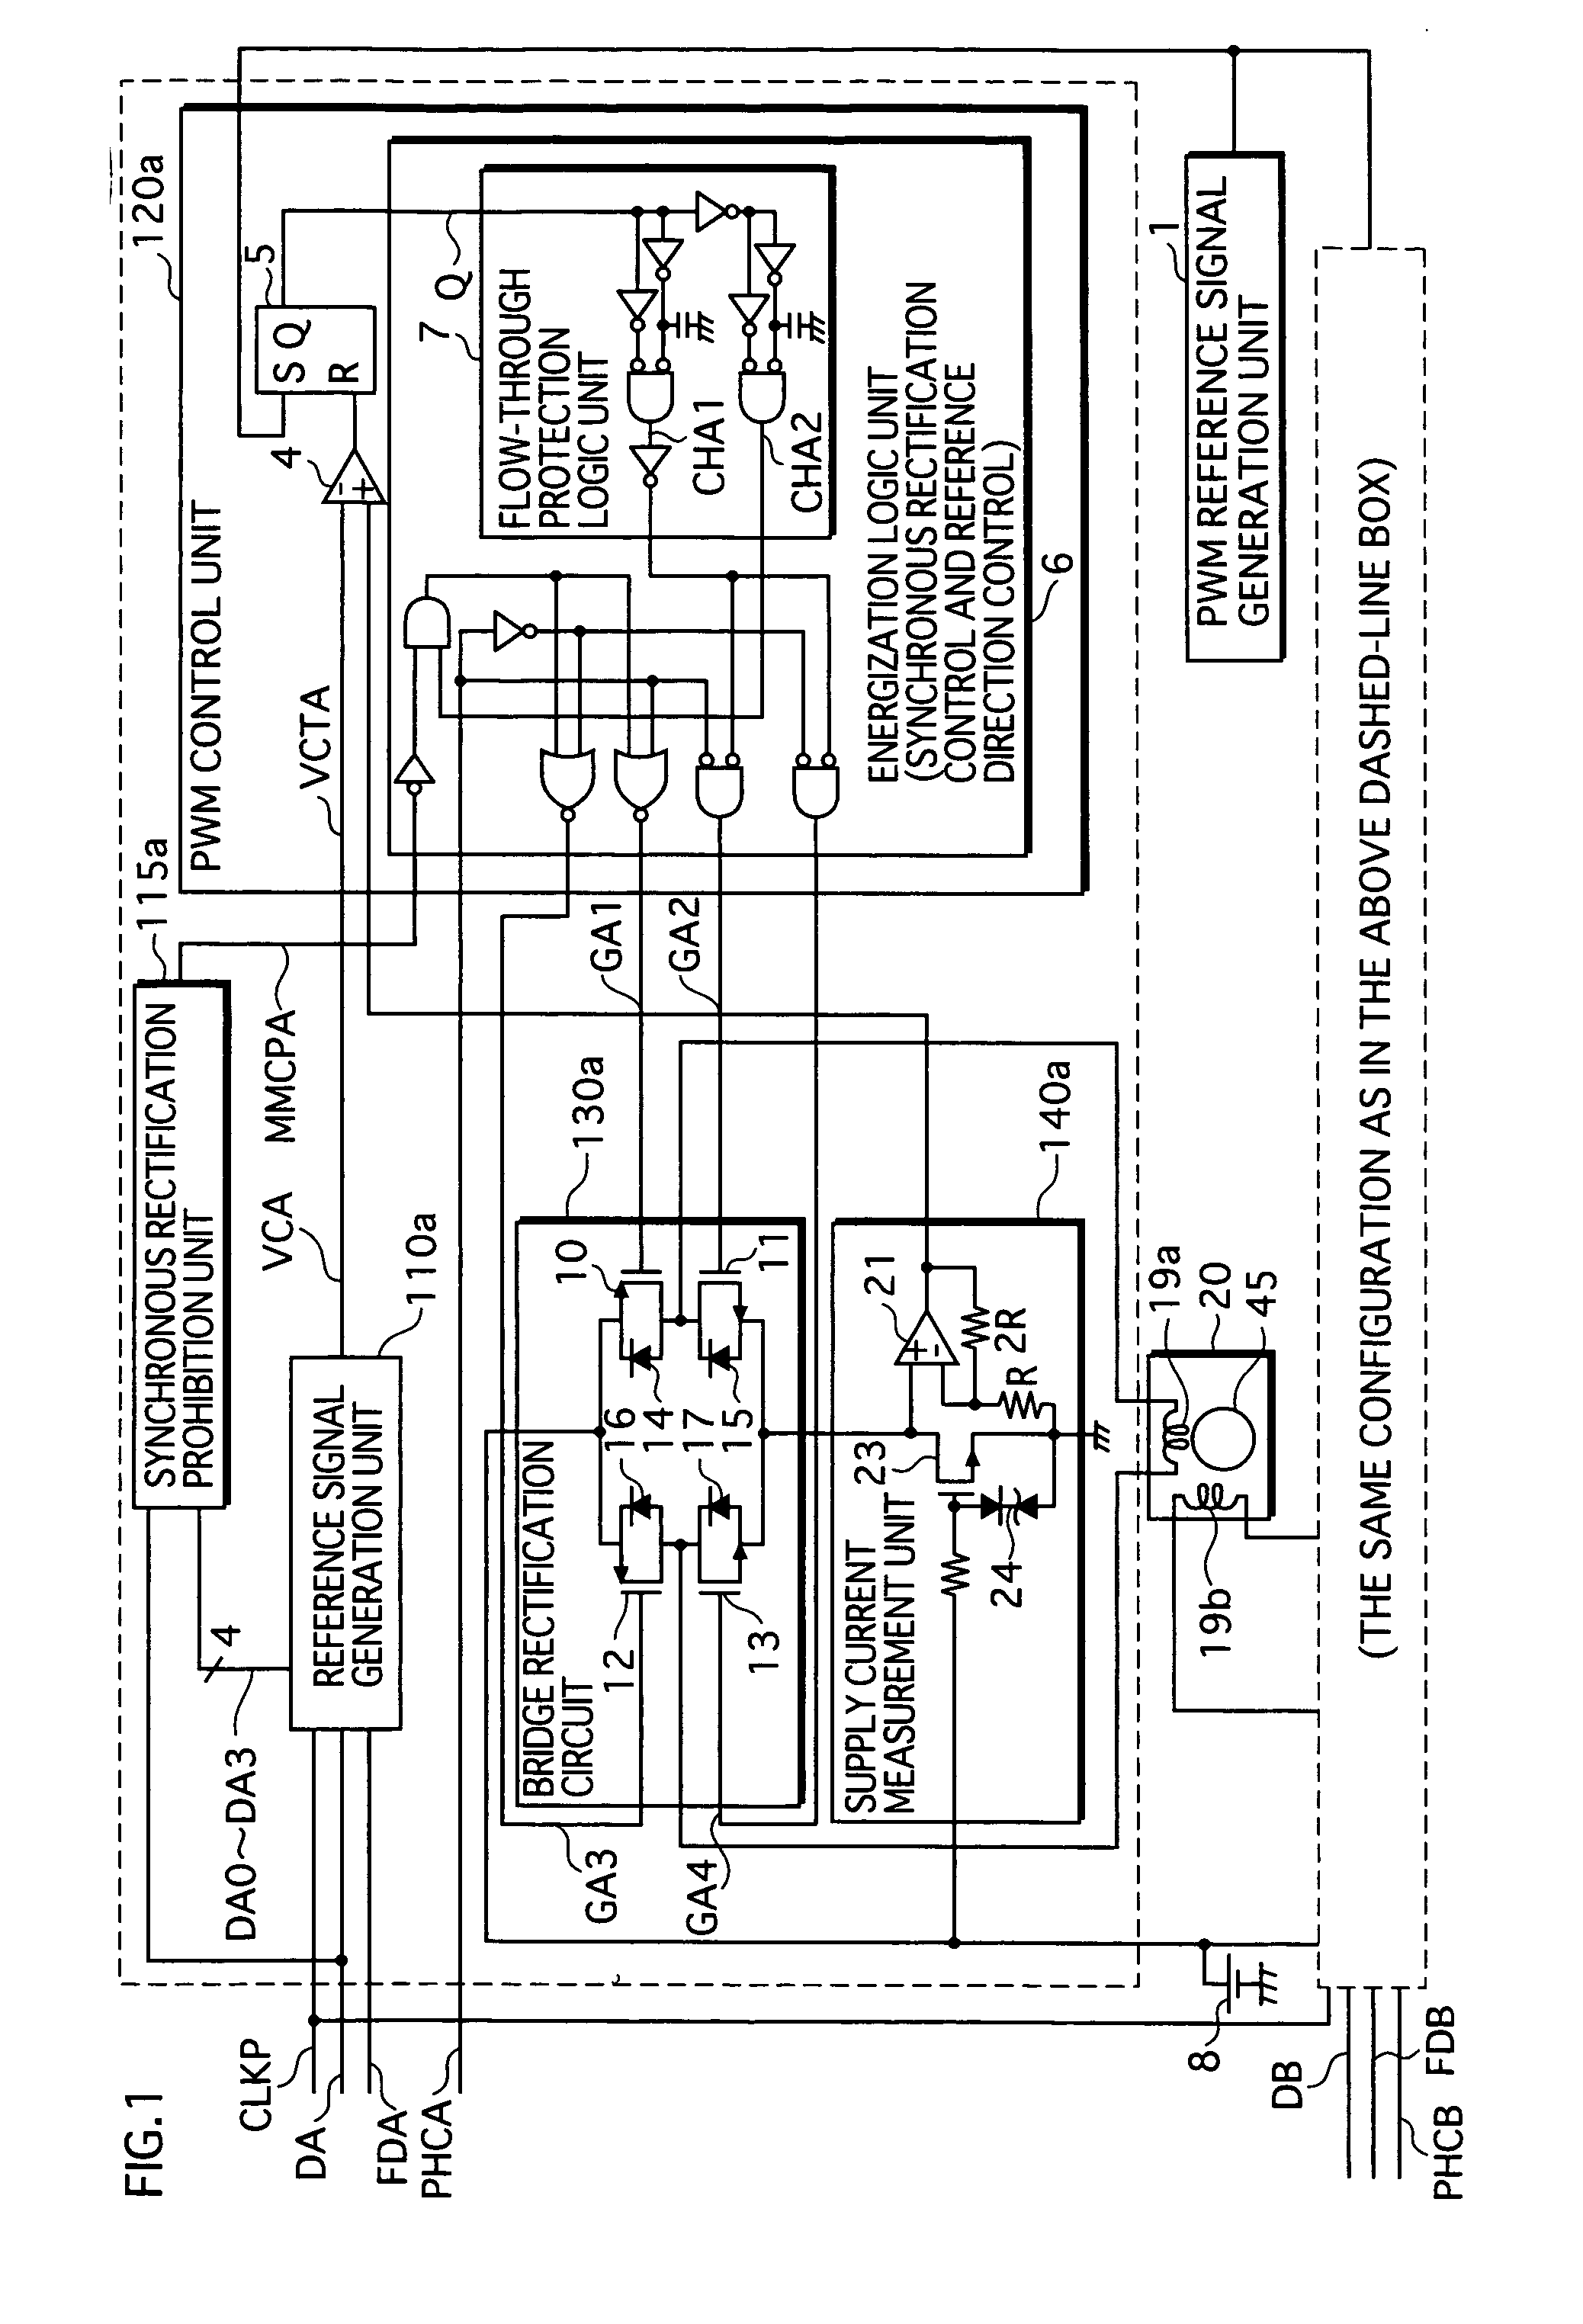 Stepping motor drive device and method